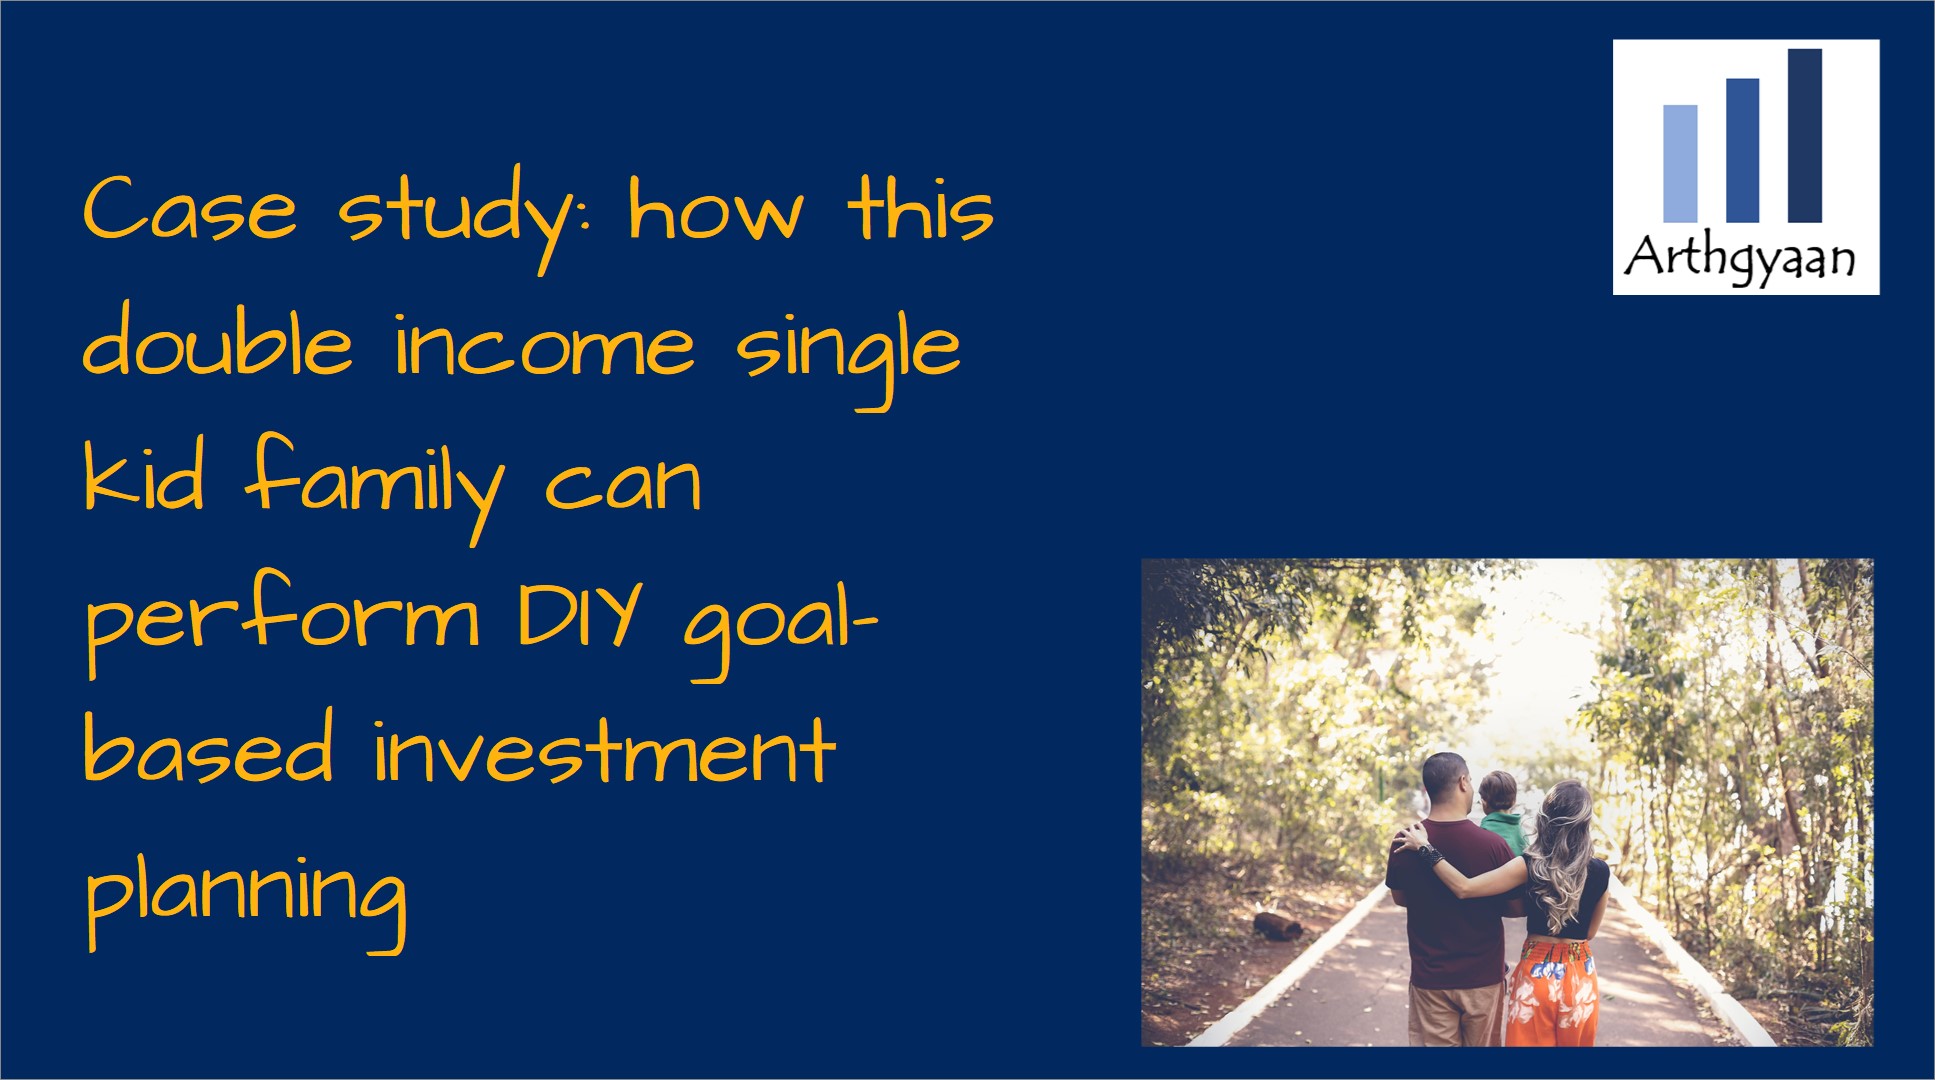 <p>This article shows how a very typical salaried couple with one child can invest for future goals using the Arthgyaan goal-based investing tool.</p>

